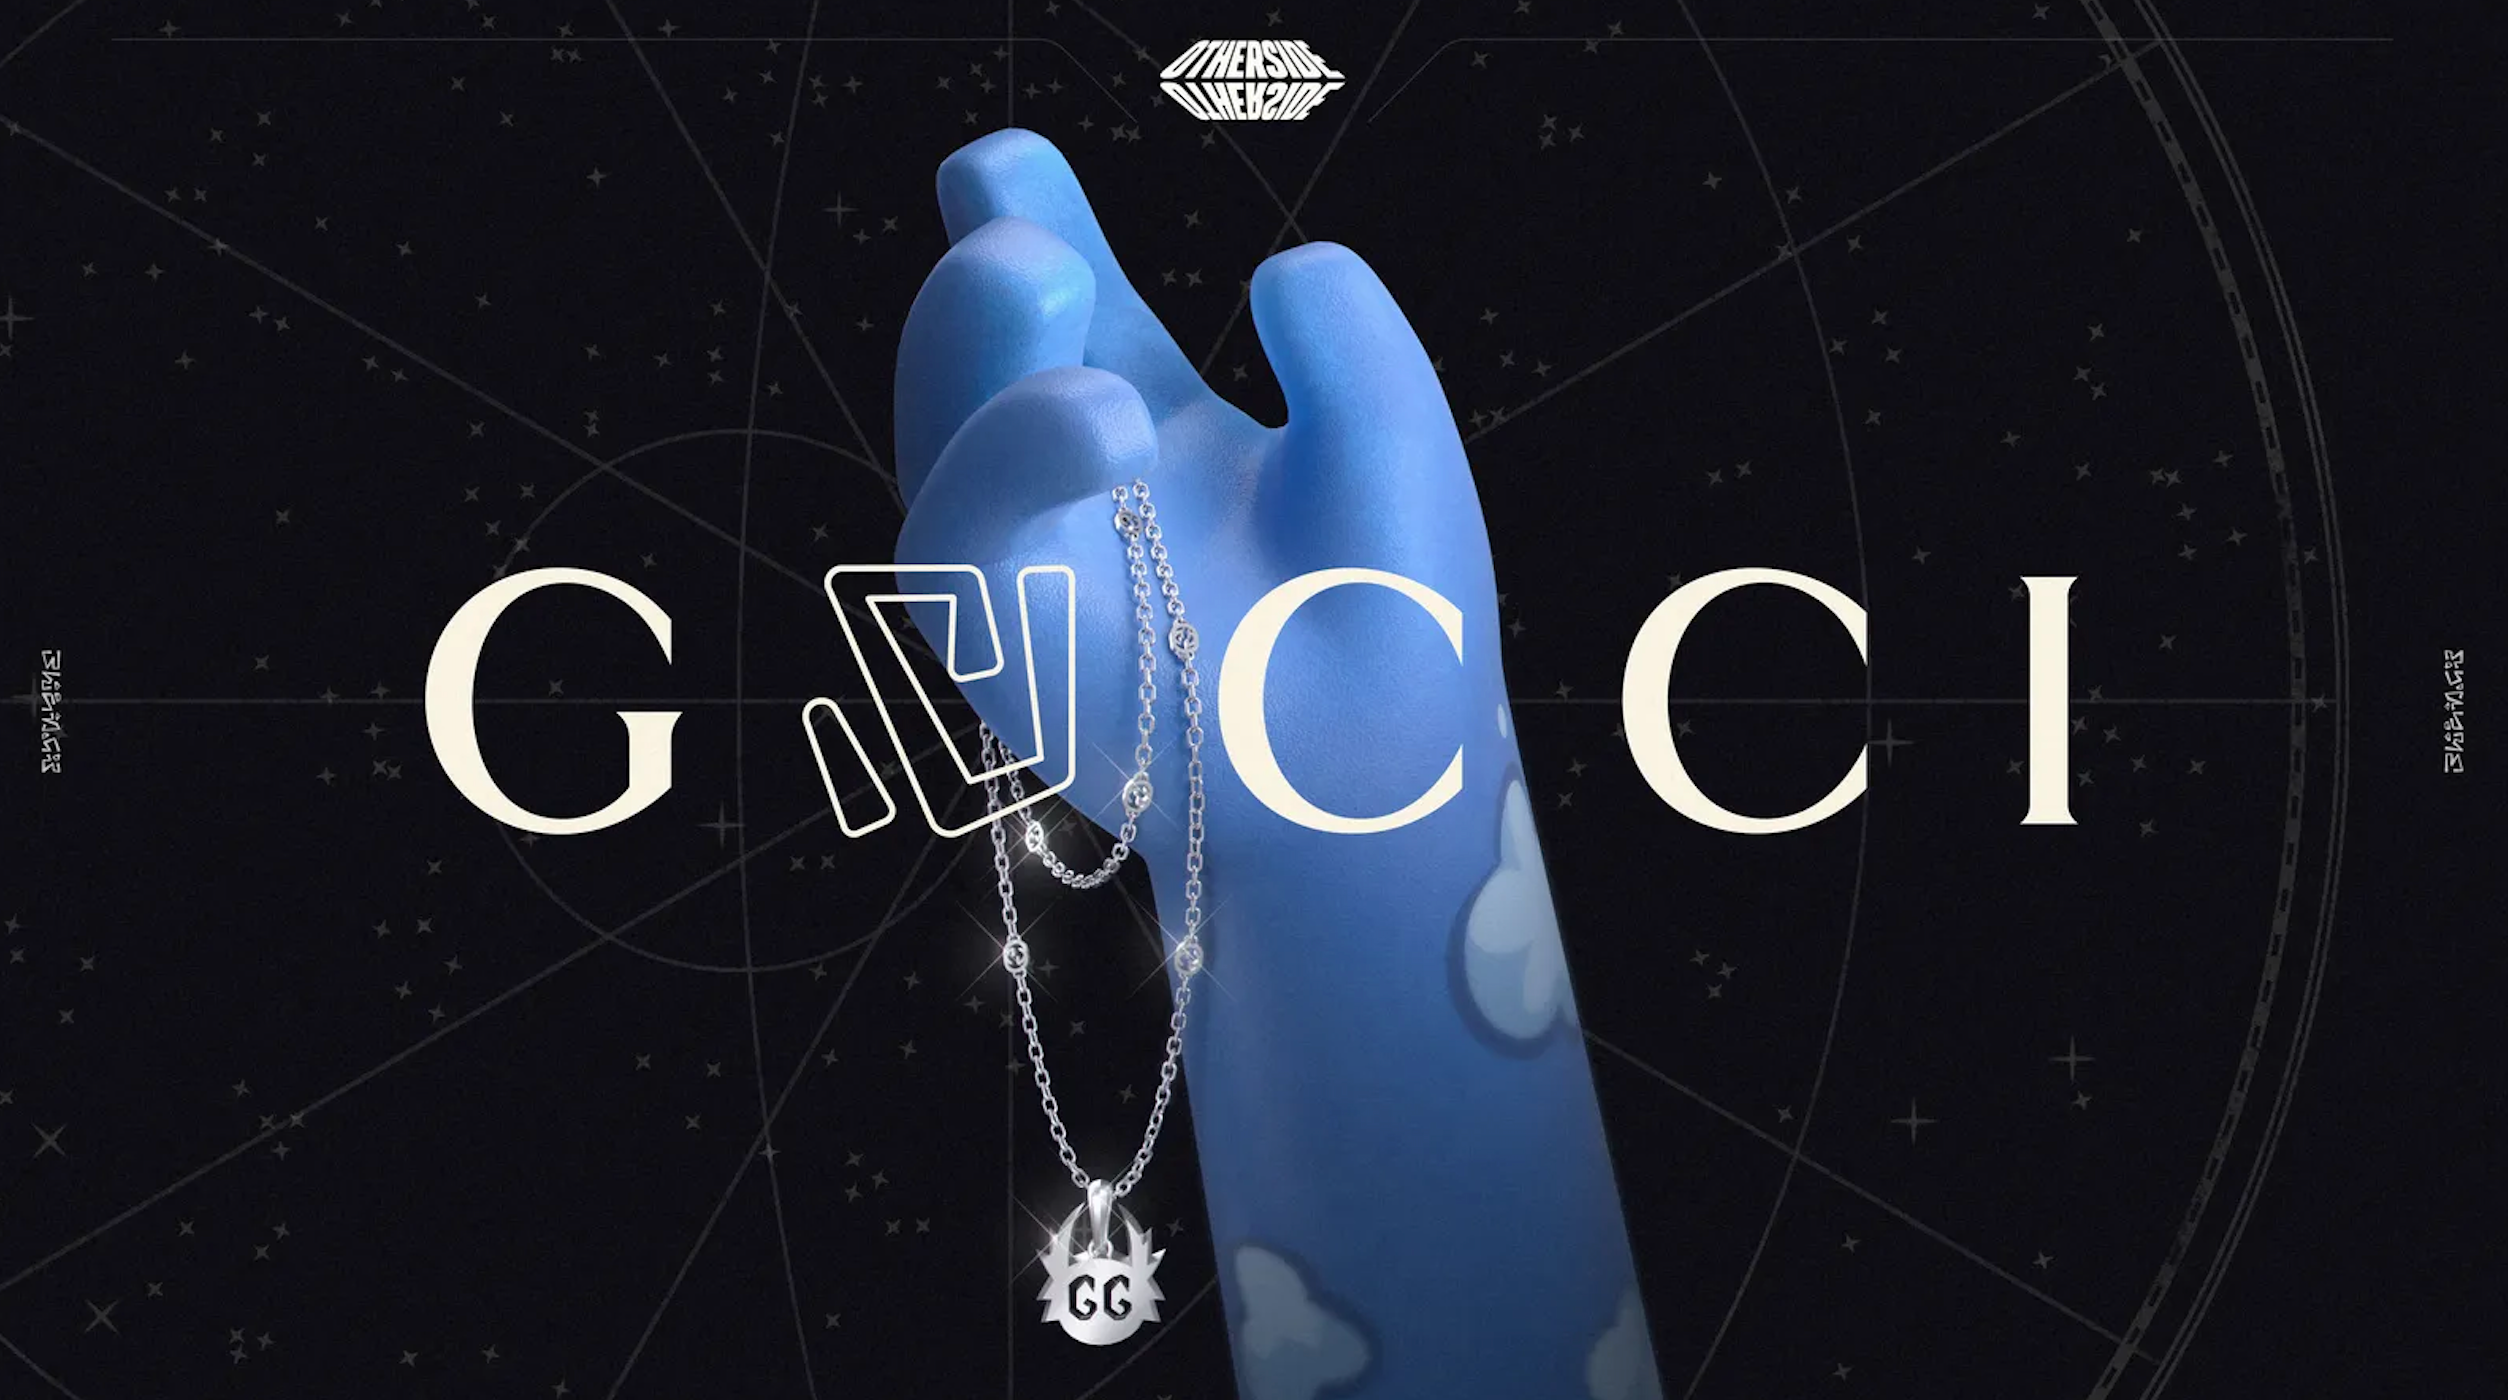 One Piece X Gucci Collaboration - Swaps4